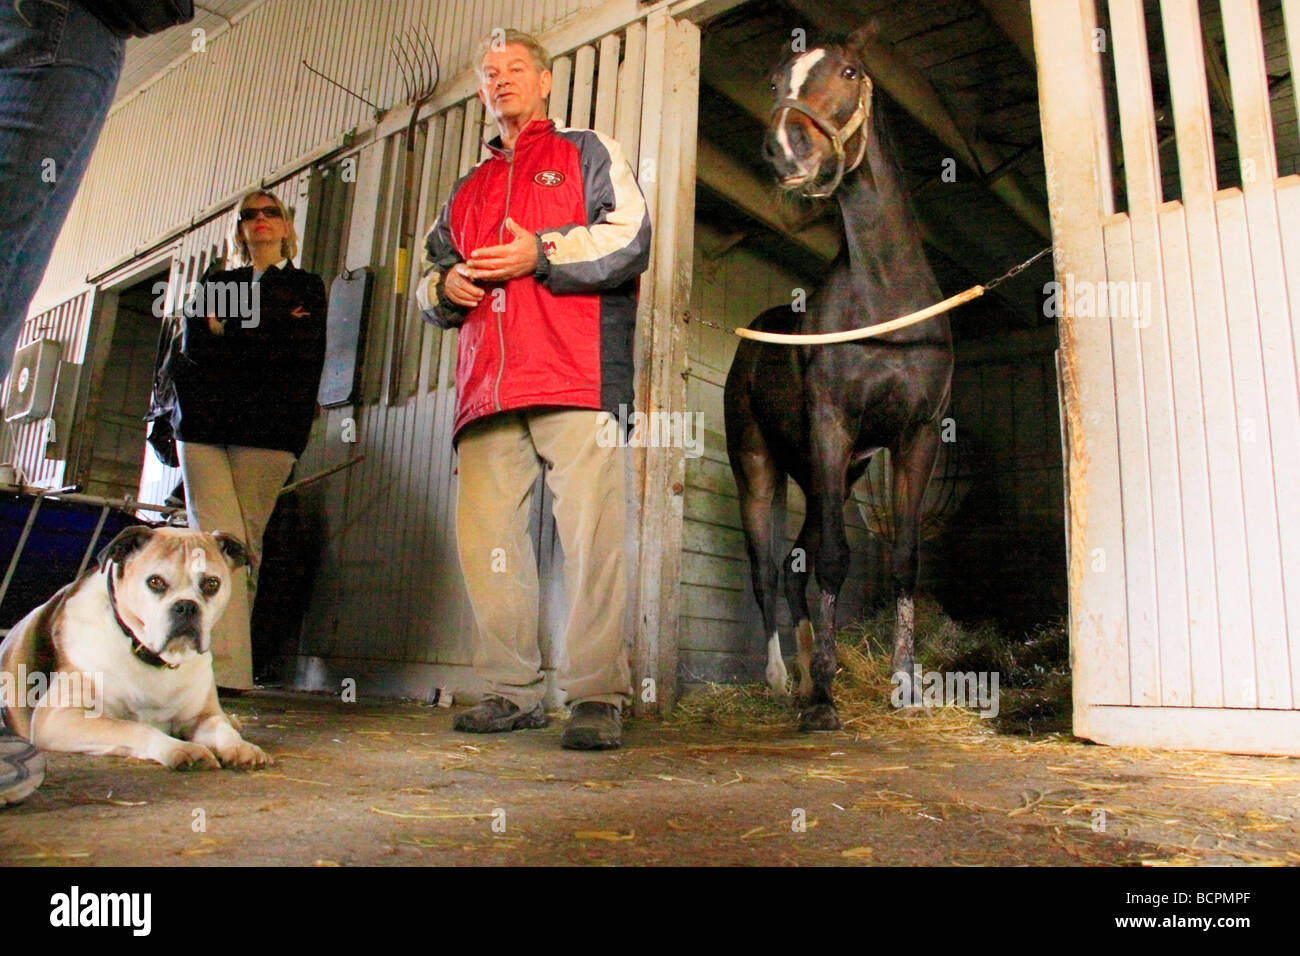 Horse owner trainer talks with tourists as his dog looks on The Thoroughbred Center Lexington Kentucky Stock Photo